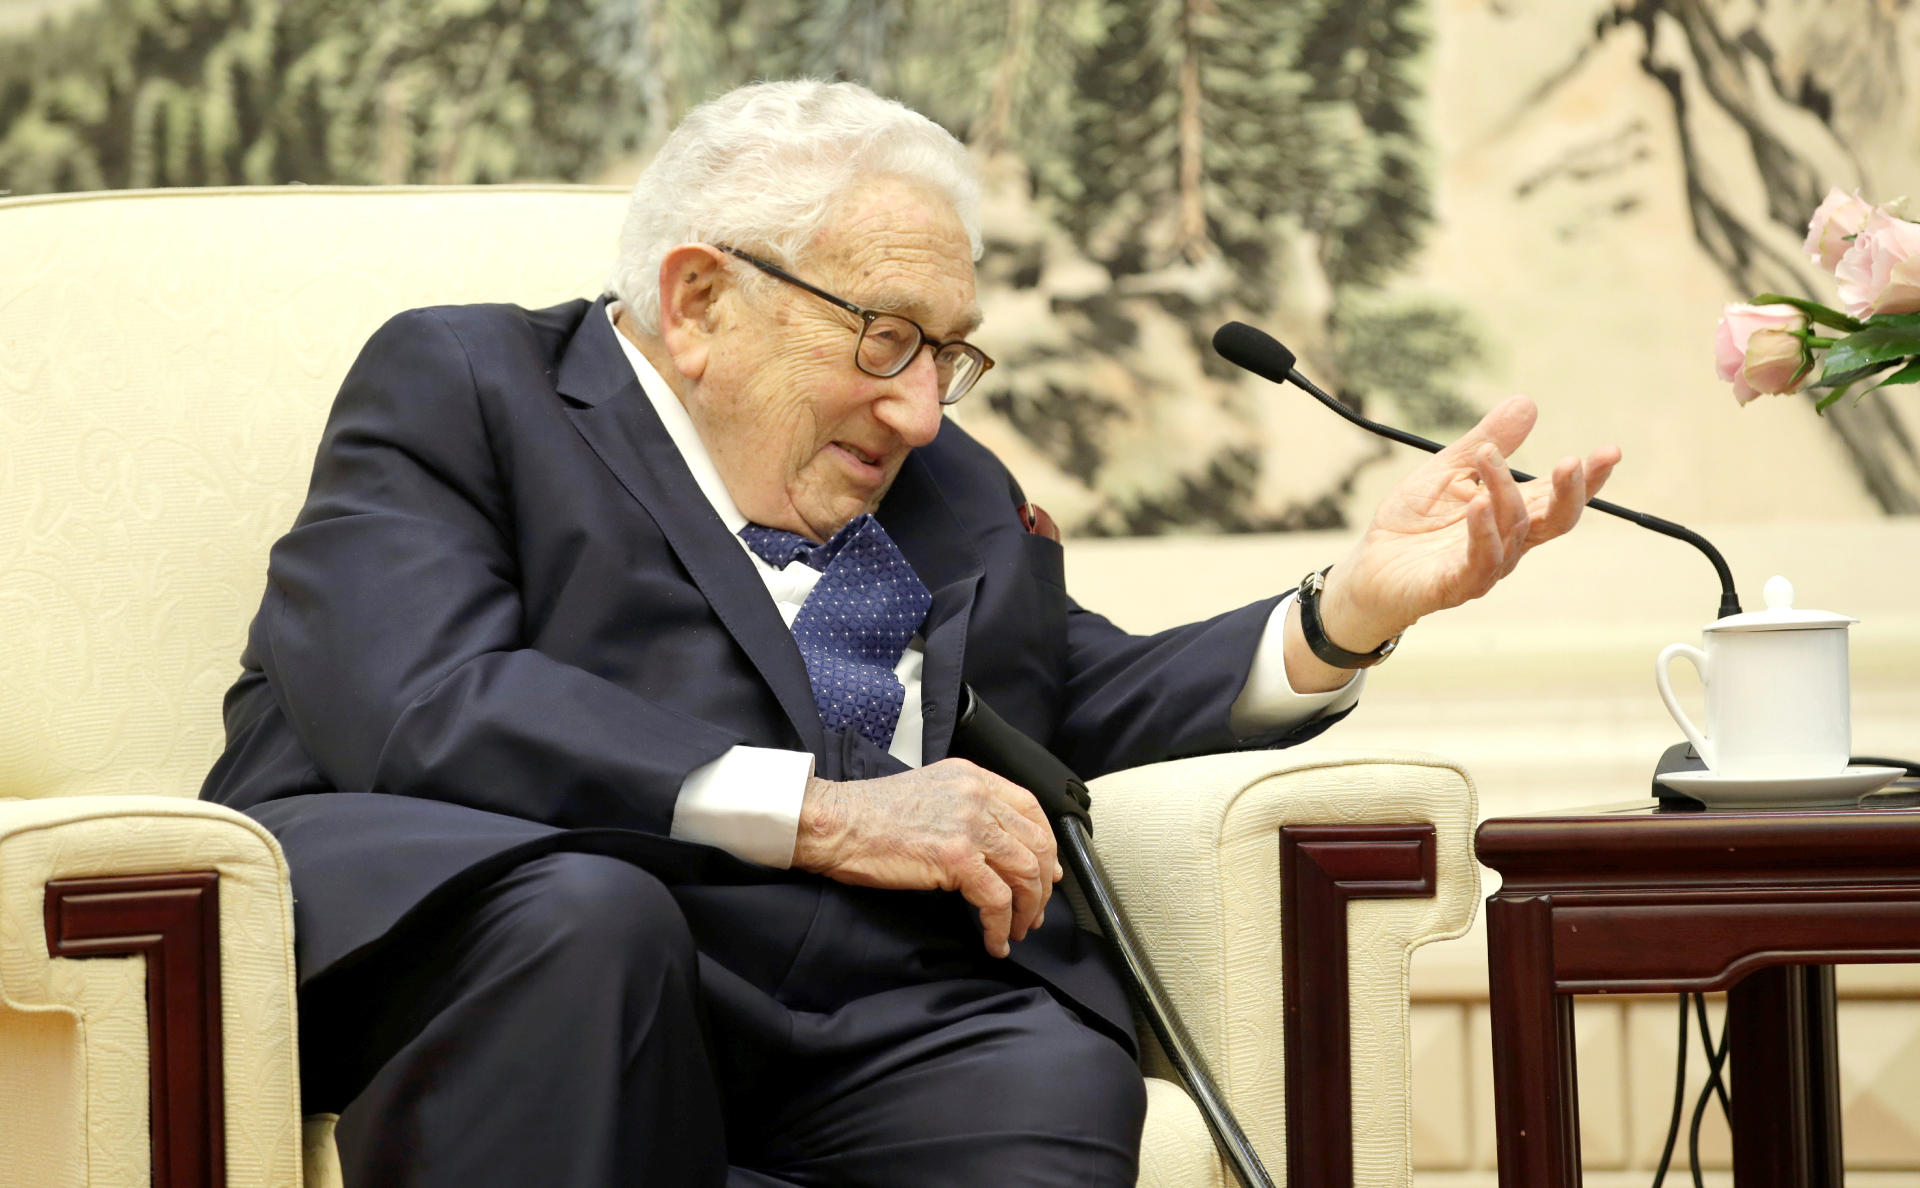 Former US secretary of state Henry Kissinger appears during a meeting with the China's foreign minister at the Great Hall of the People in Beijing, China, on Nov. 22, 2019. EFE FILE/Jason Lee POOL ARCHIVE